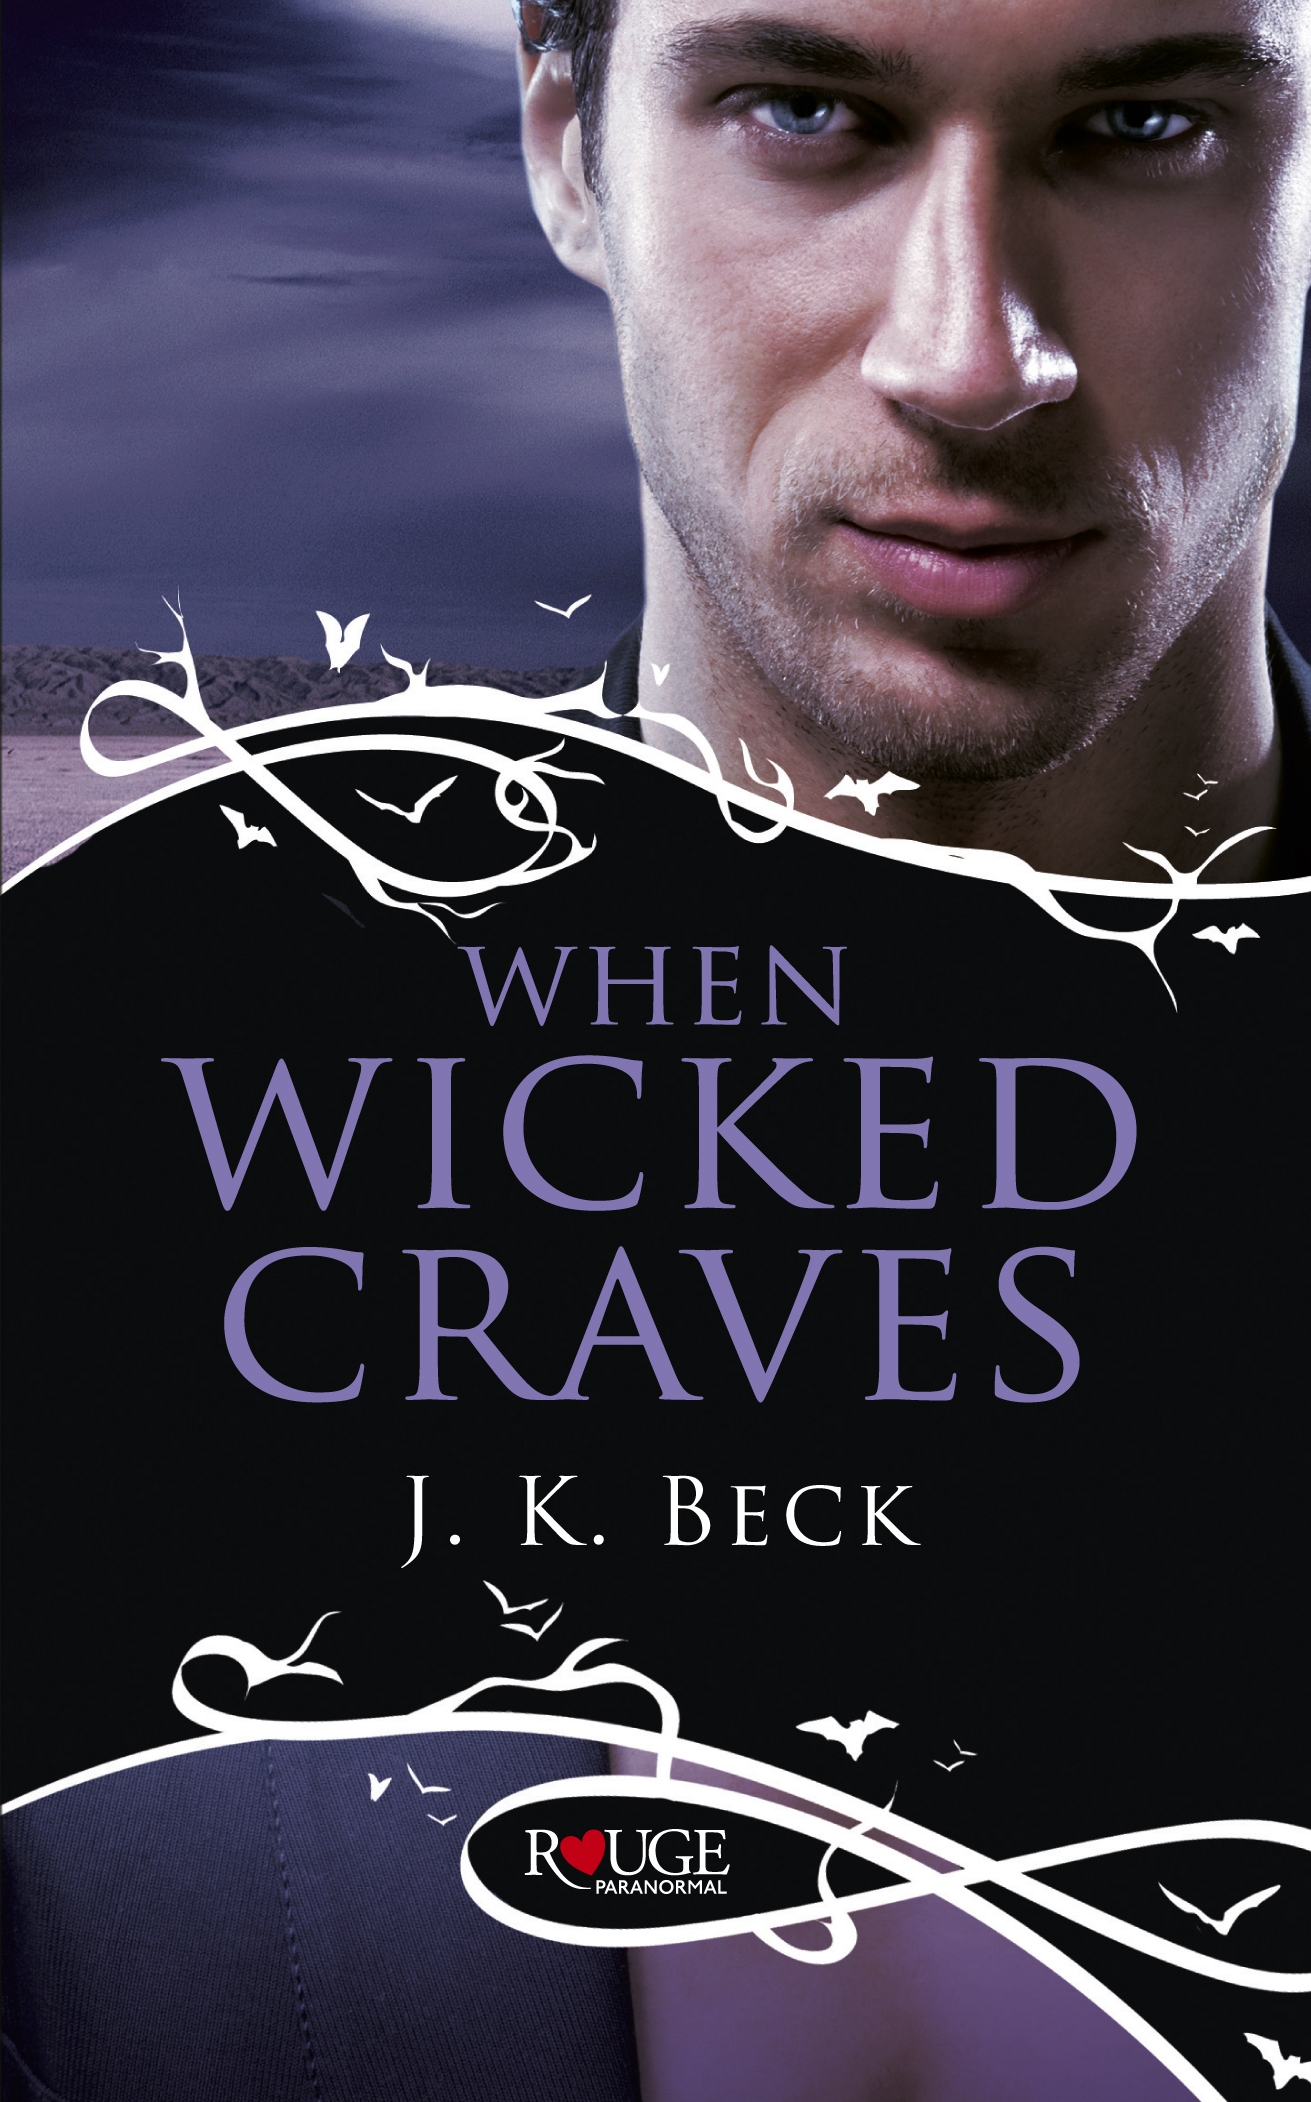 When Wicked Craves A Rouge Paranormal Romance By Jk Beck Penguin 